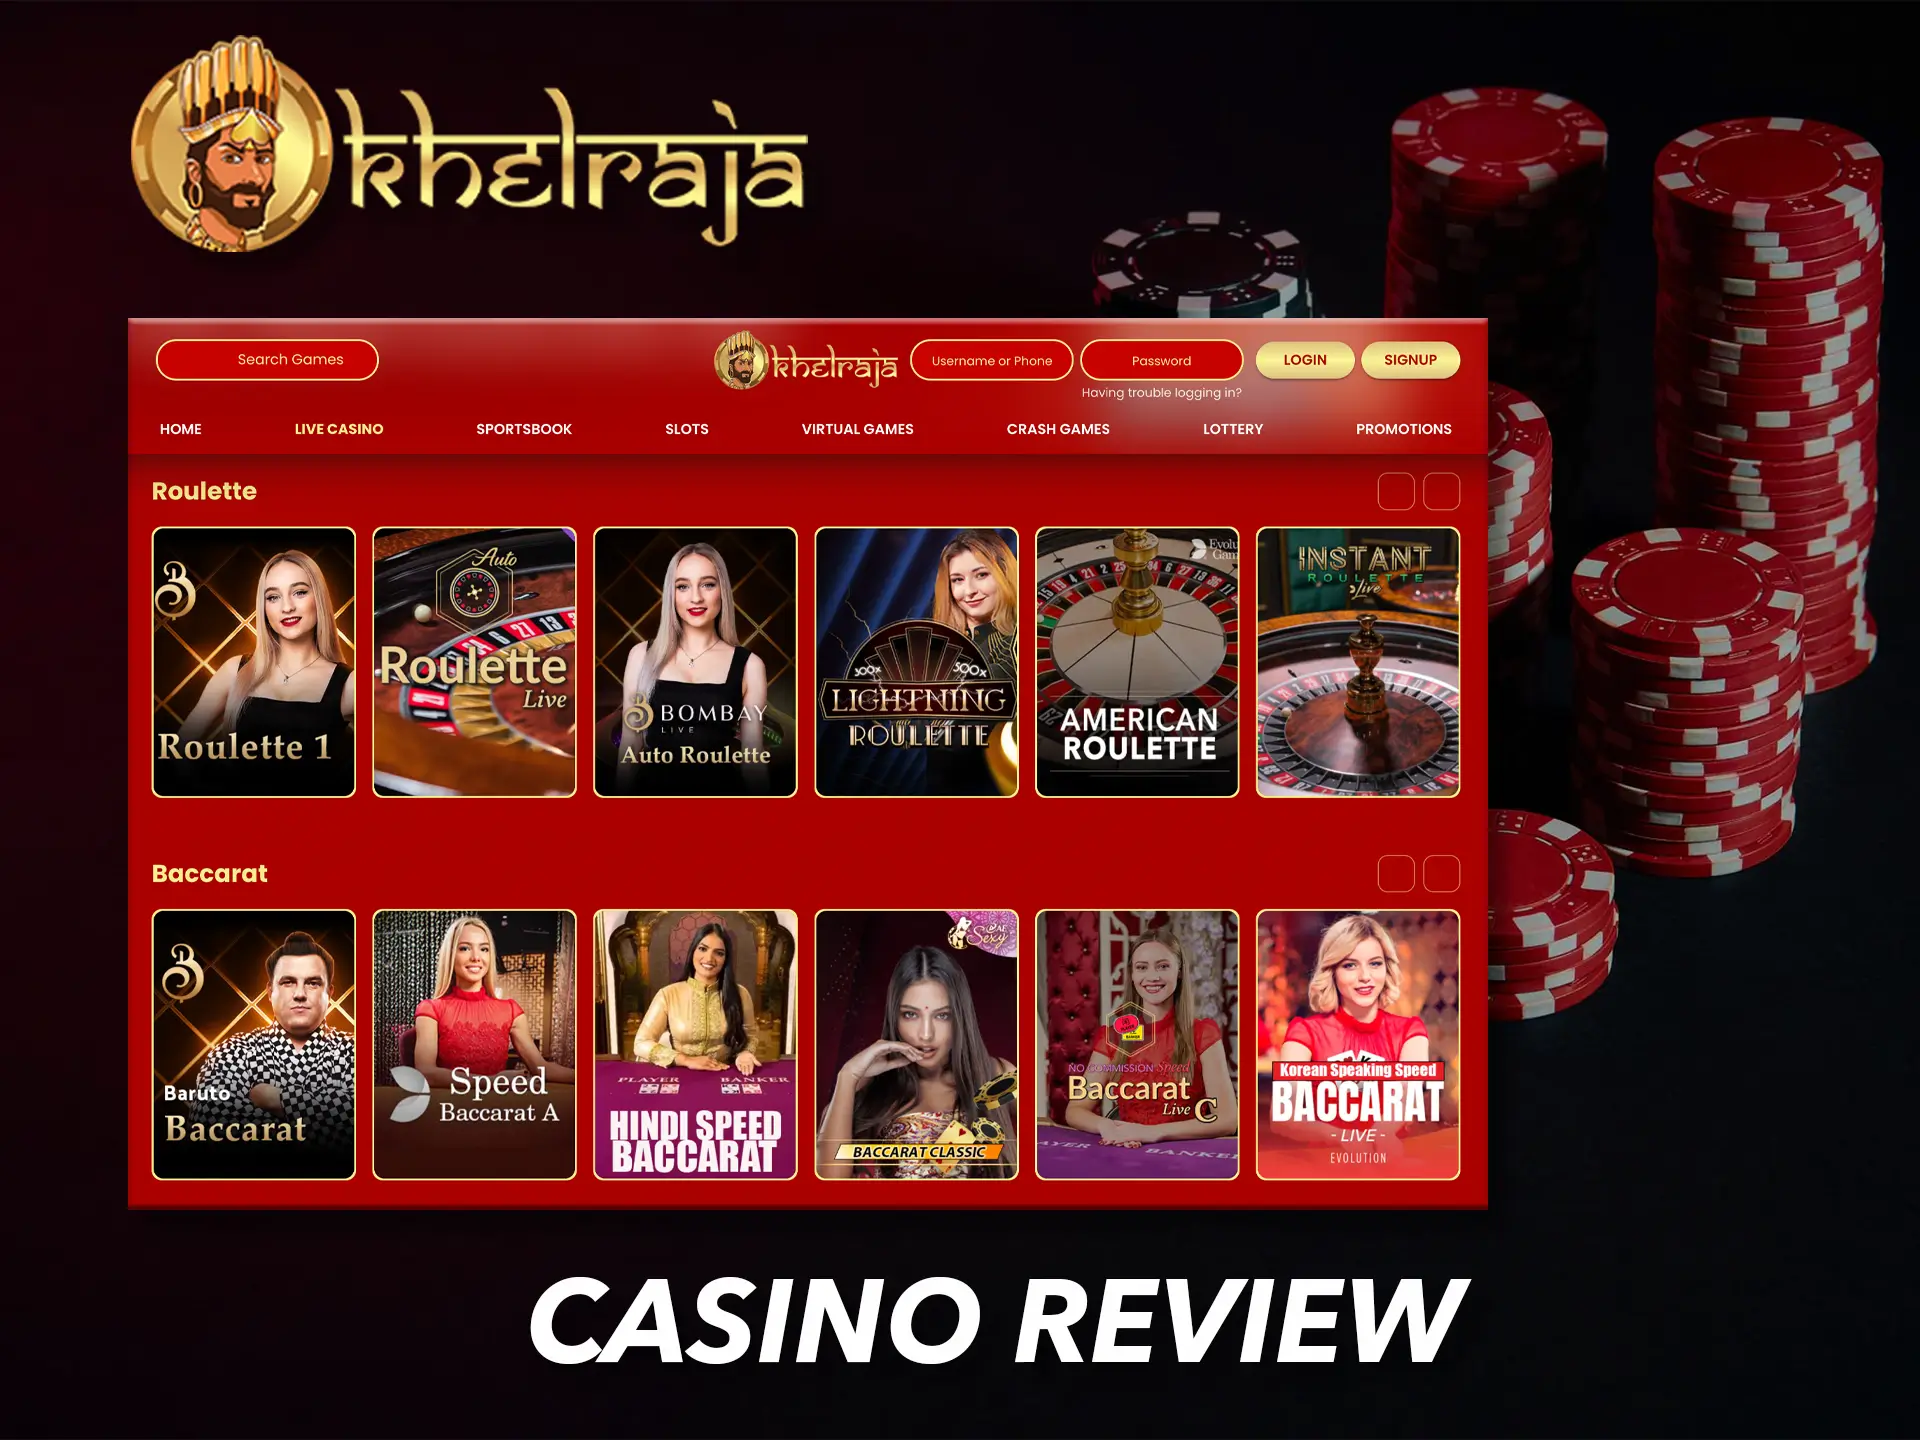 Try your luck and excitement at the casino from Khelraja.